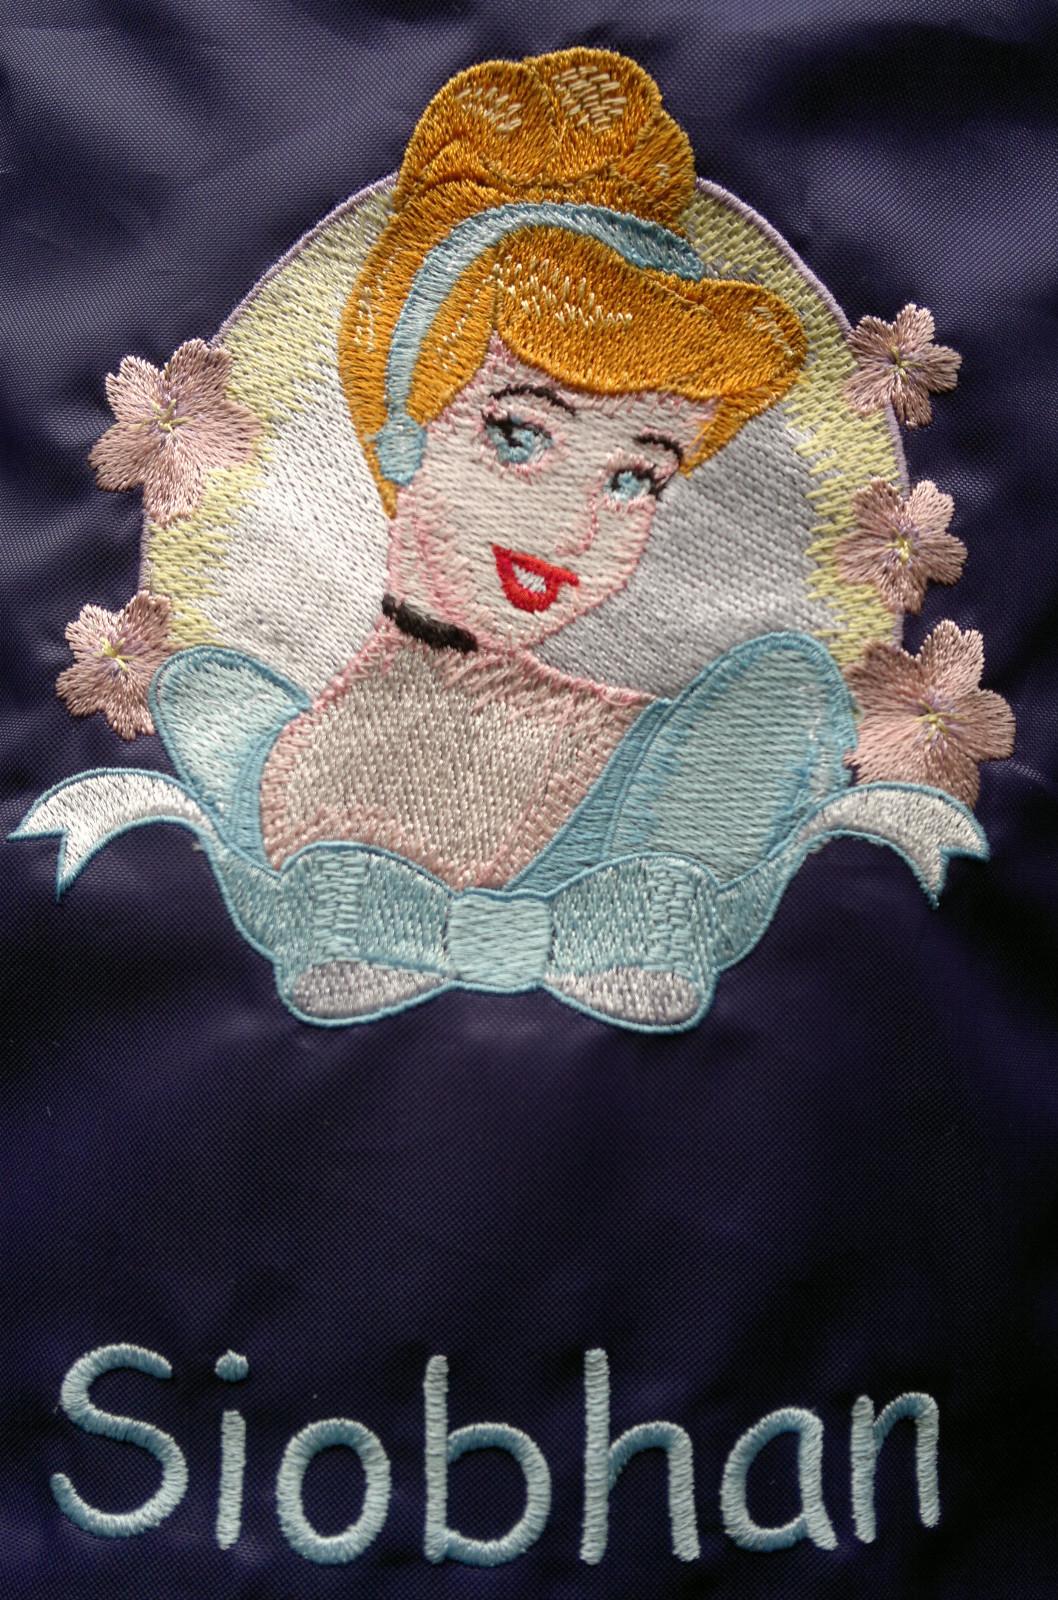 Towel with Cinderella embroidery design